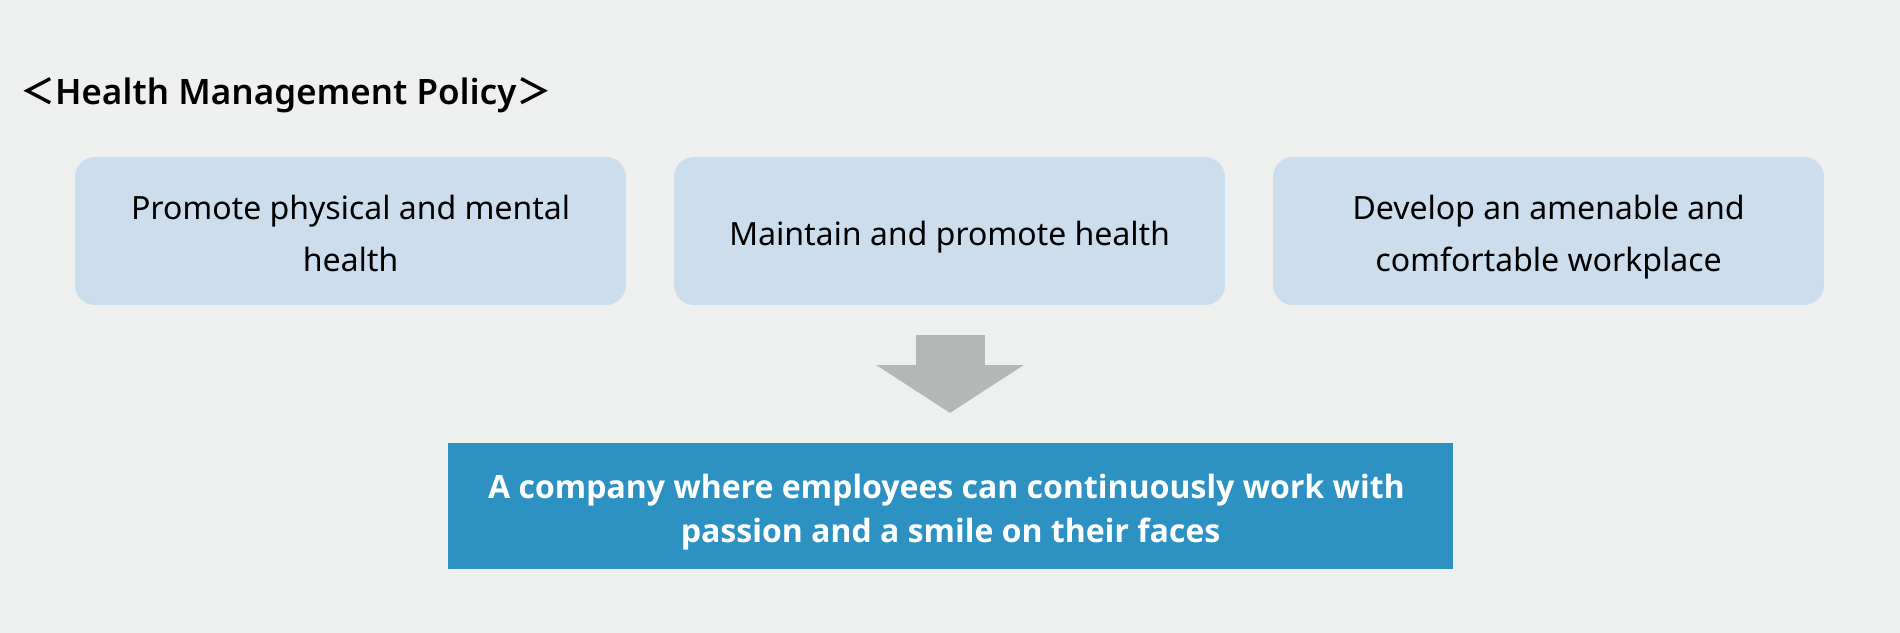 Promote physical and mental health. Maintain and promote health. Develop an amenable and comfortable workplace. → A company where employees can continuously work with passion and a smile on their faces